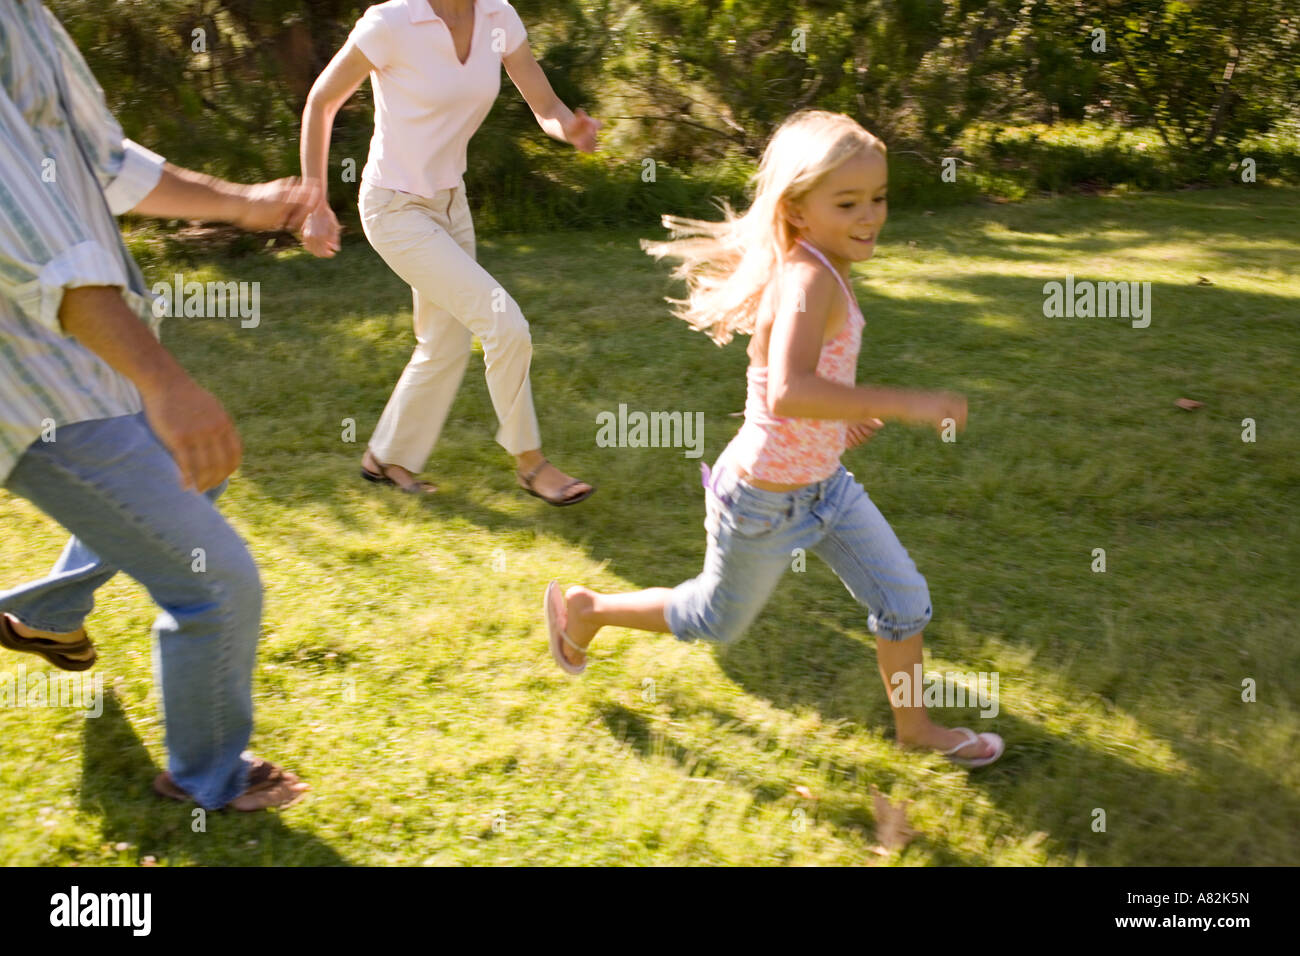 A family in a park playing Stock Photo